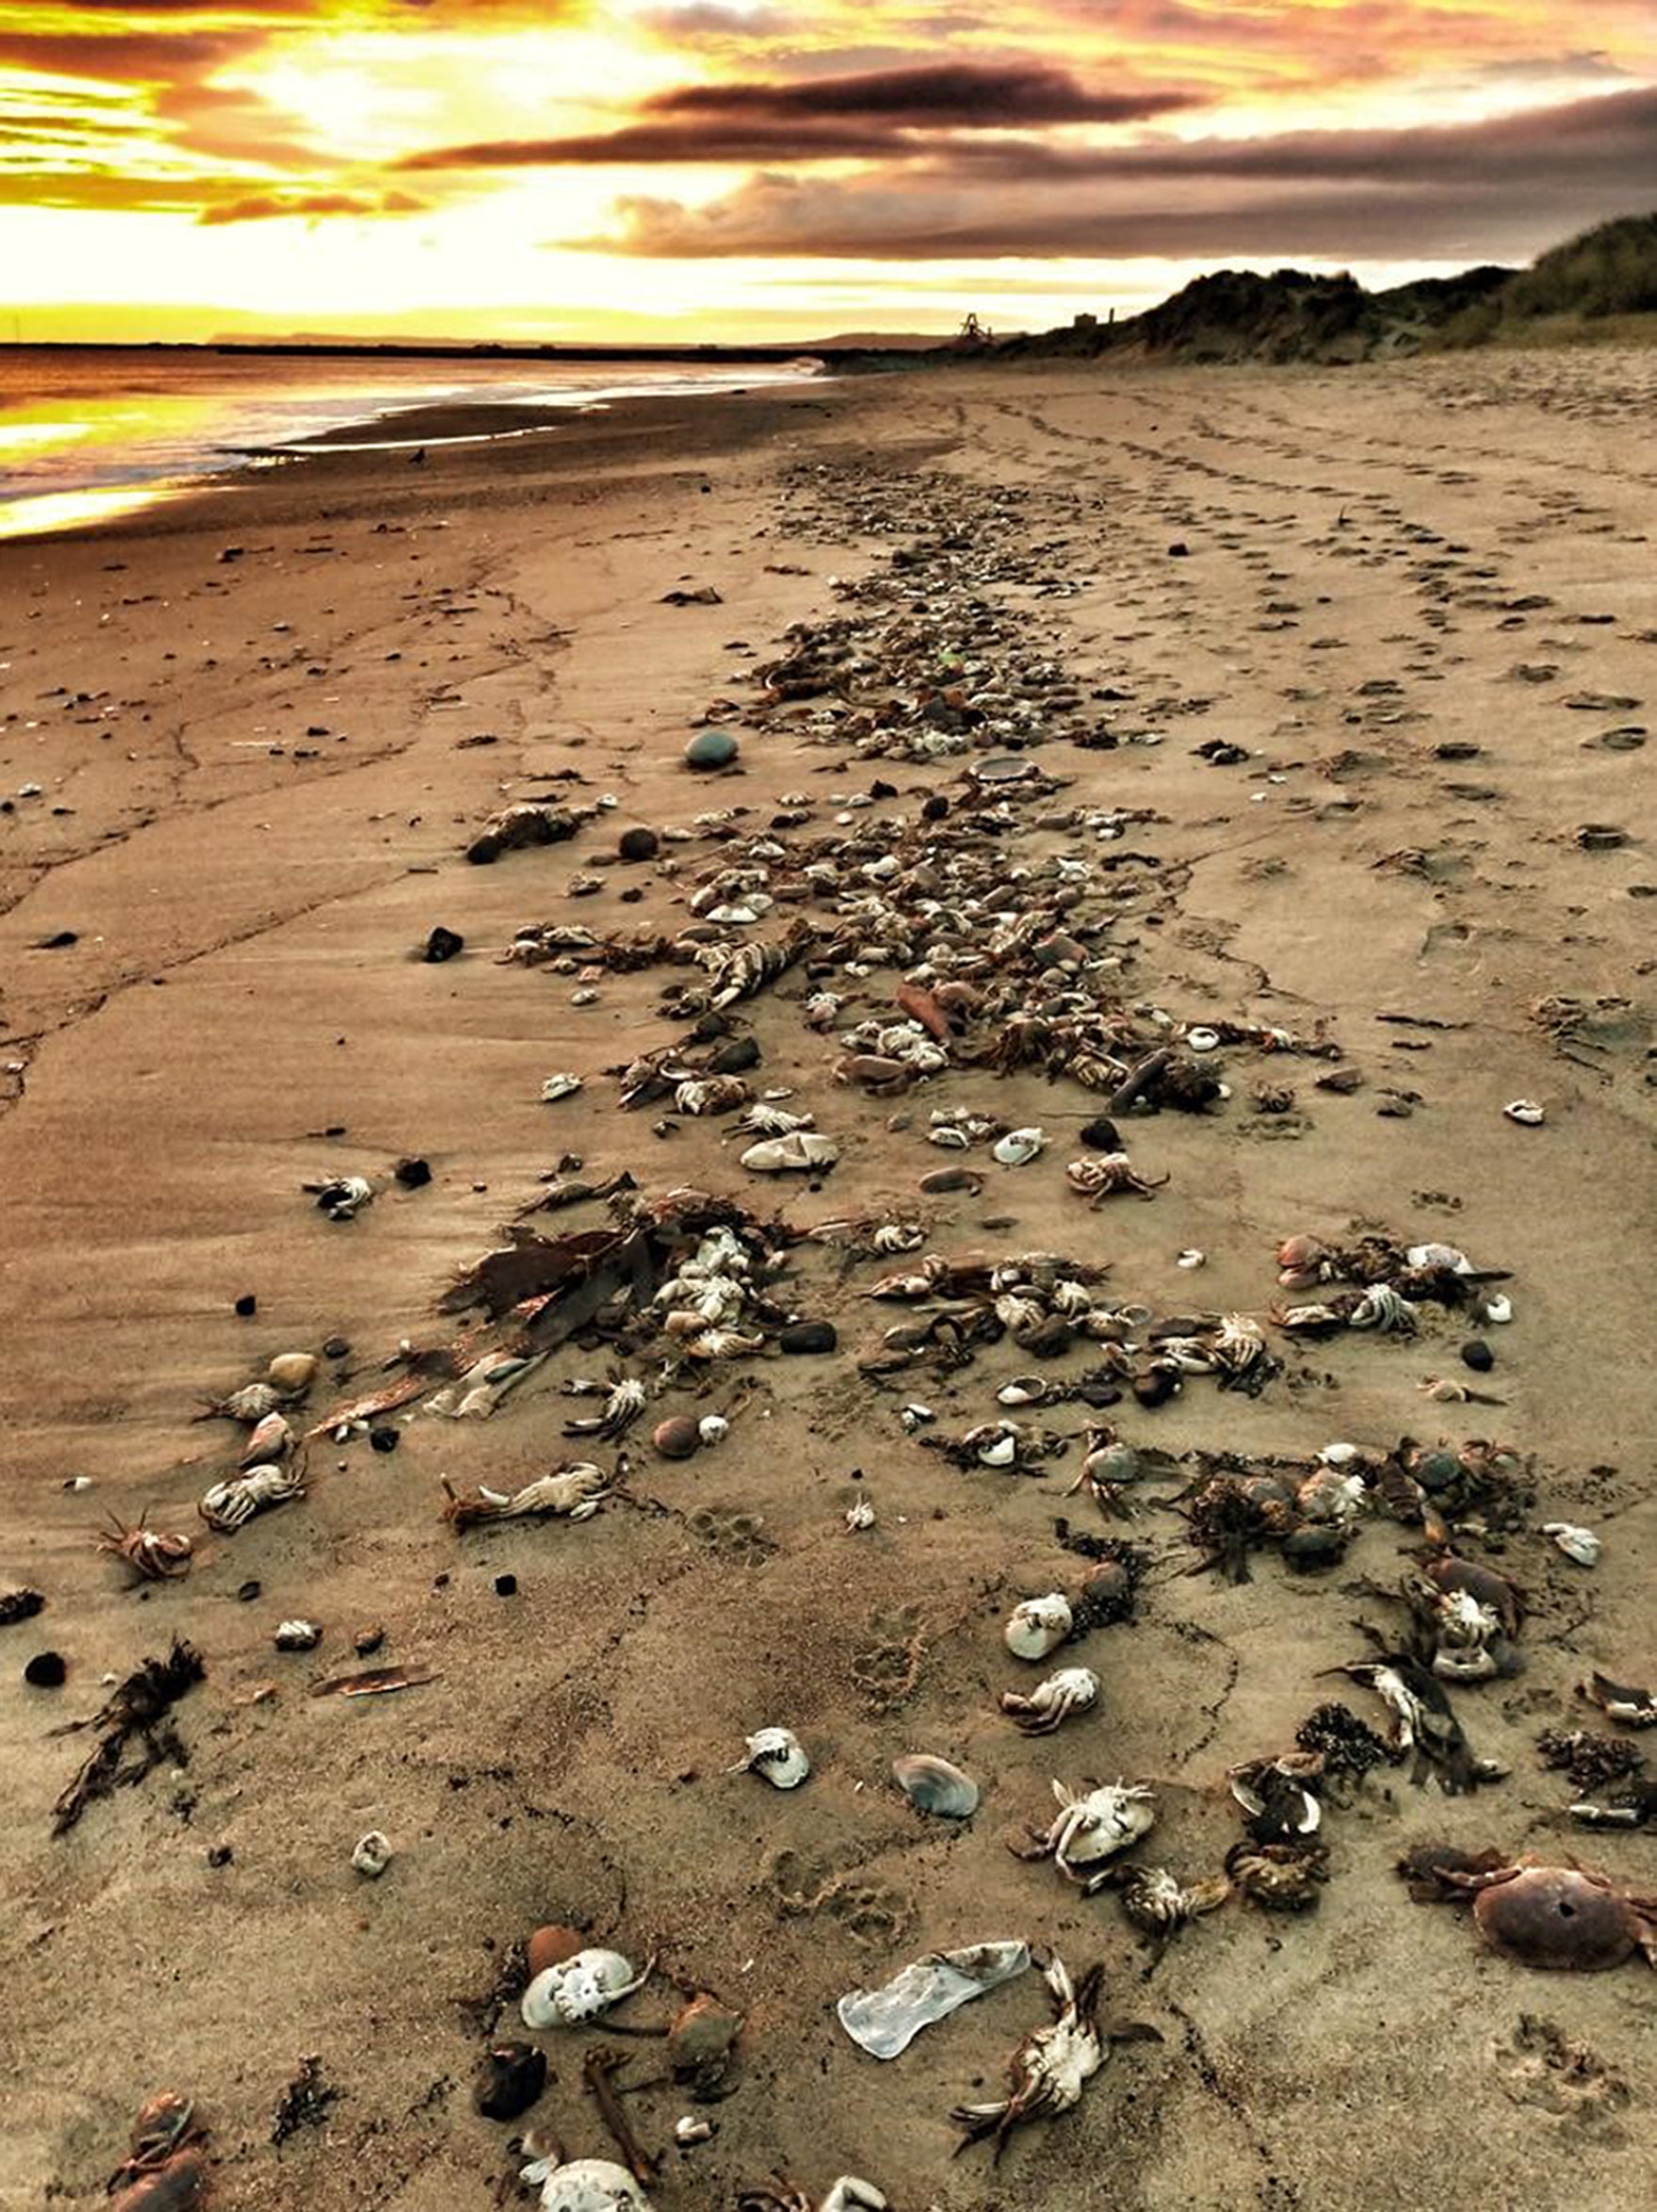 Hundreds of dead crabs on the beach at Seaton Carew, Hartlepool (Paul Grainger/PA)